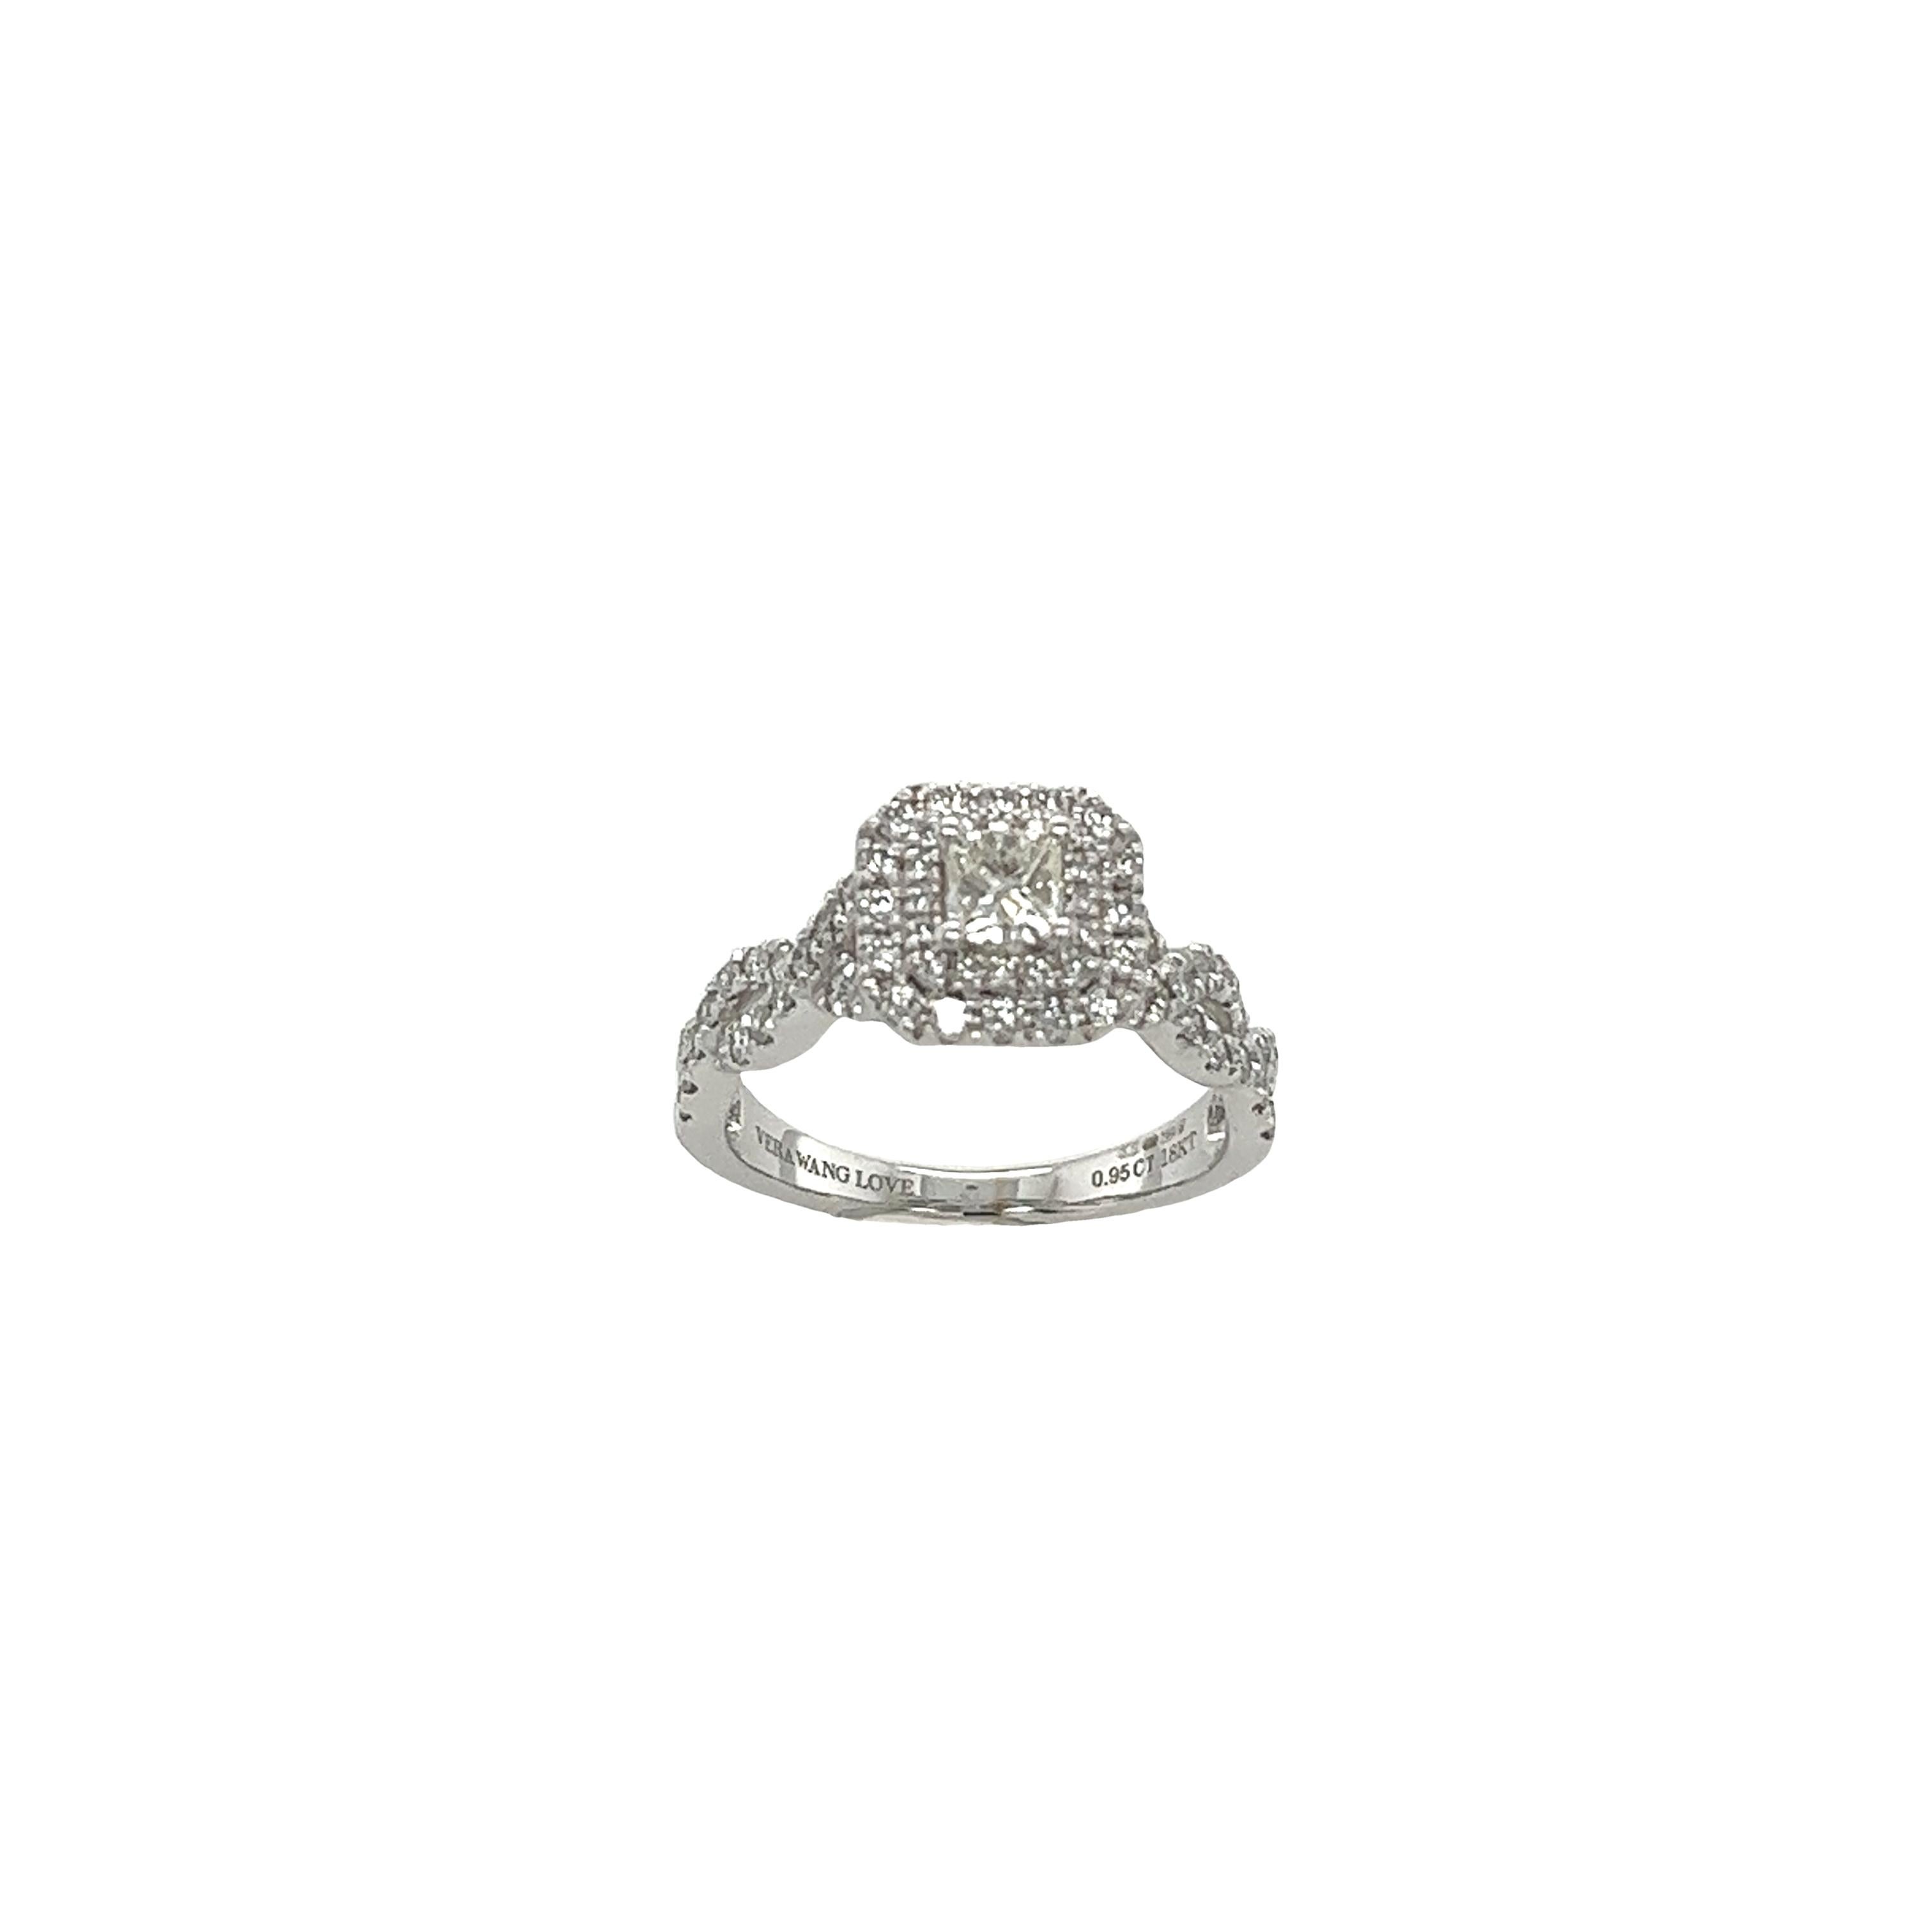 Round Cut Vera Wang Diamond Cluster Engagement Ring Set With 0.95ct Natural Diamonds For Sale